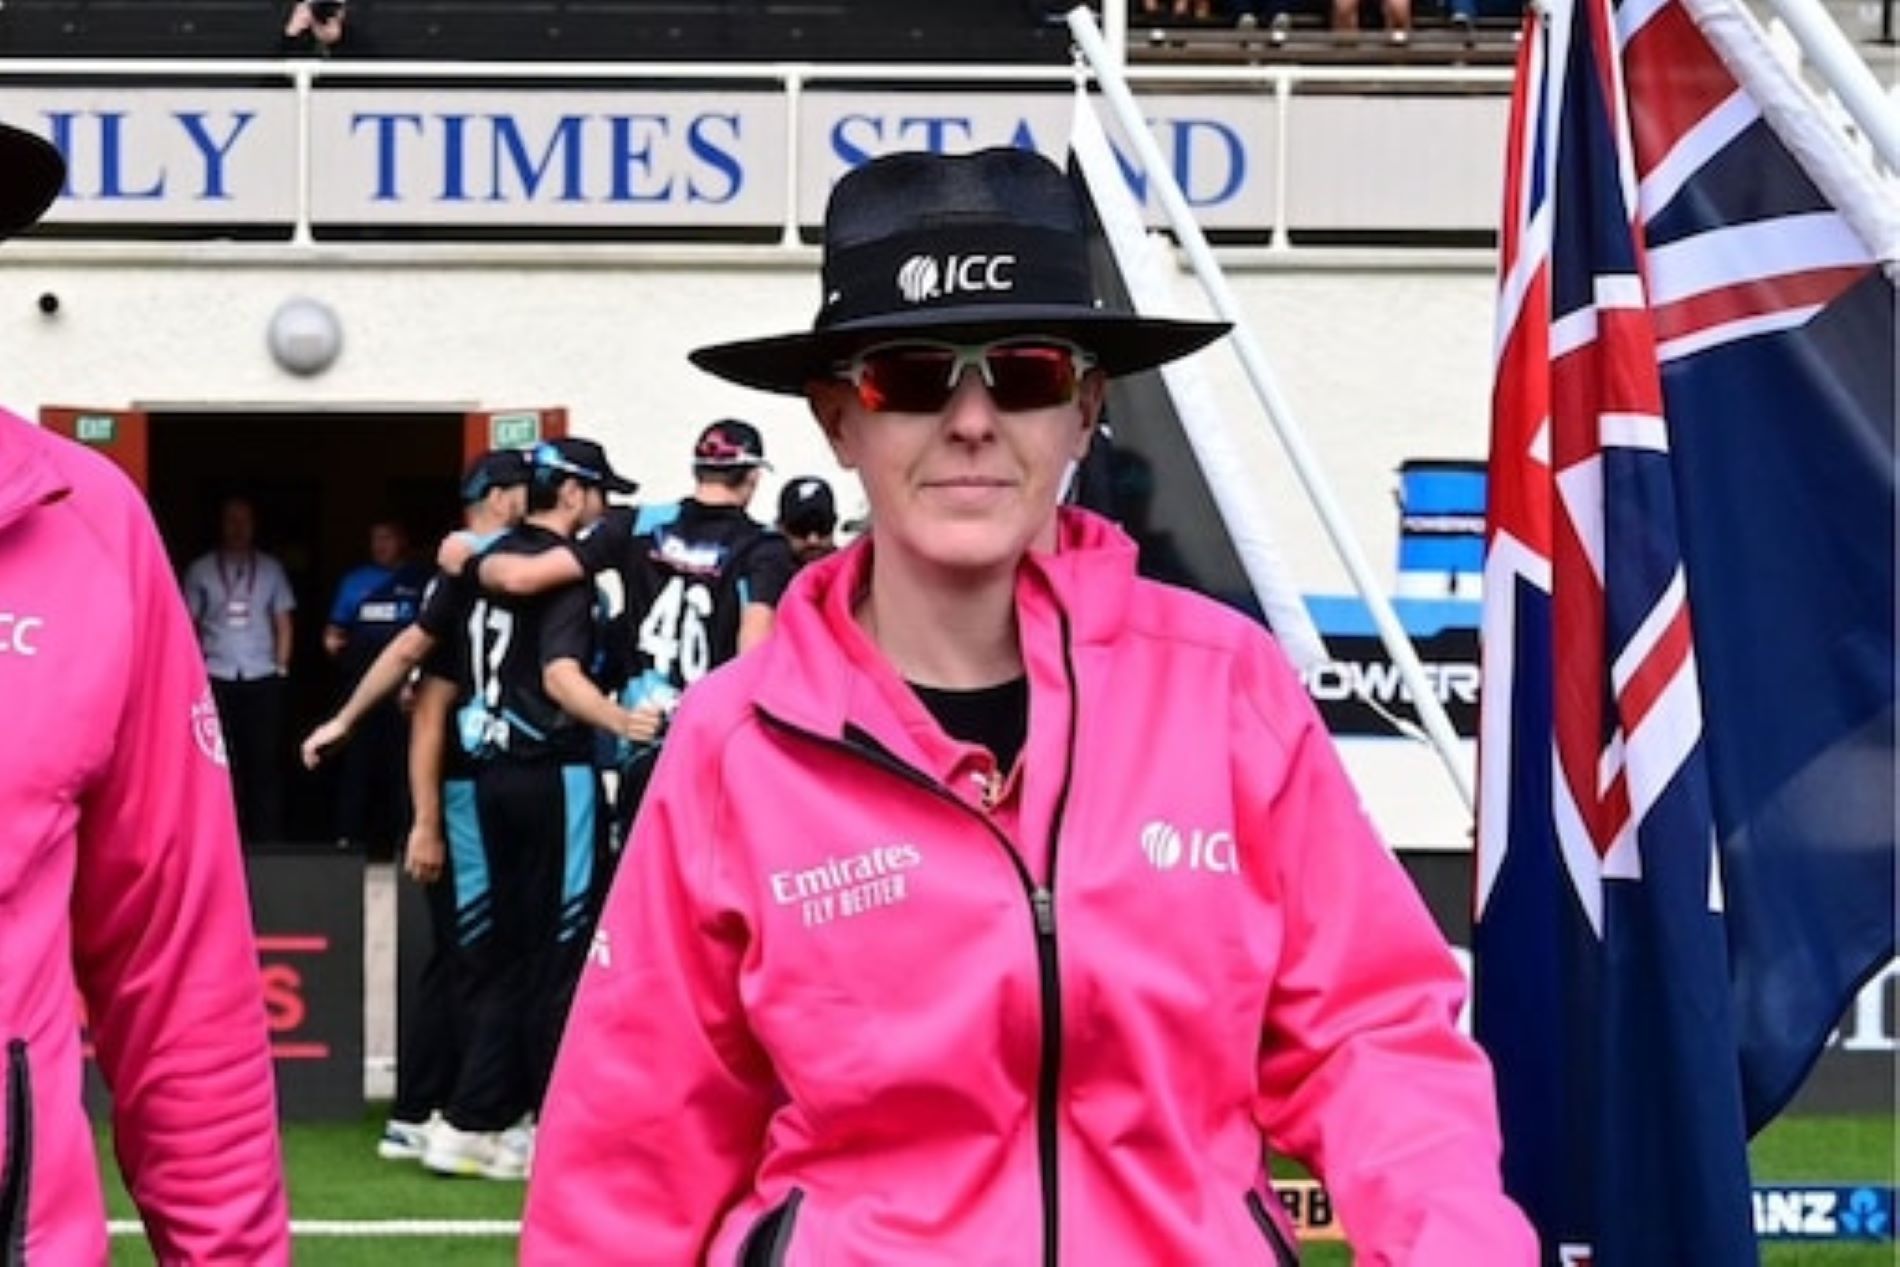 Kim Cotton was the on field umpire for the second T20I between Sri Lanka and NewZealand